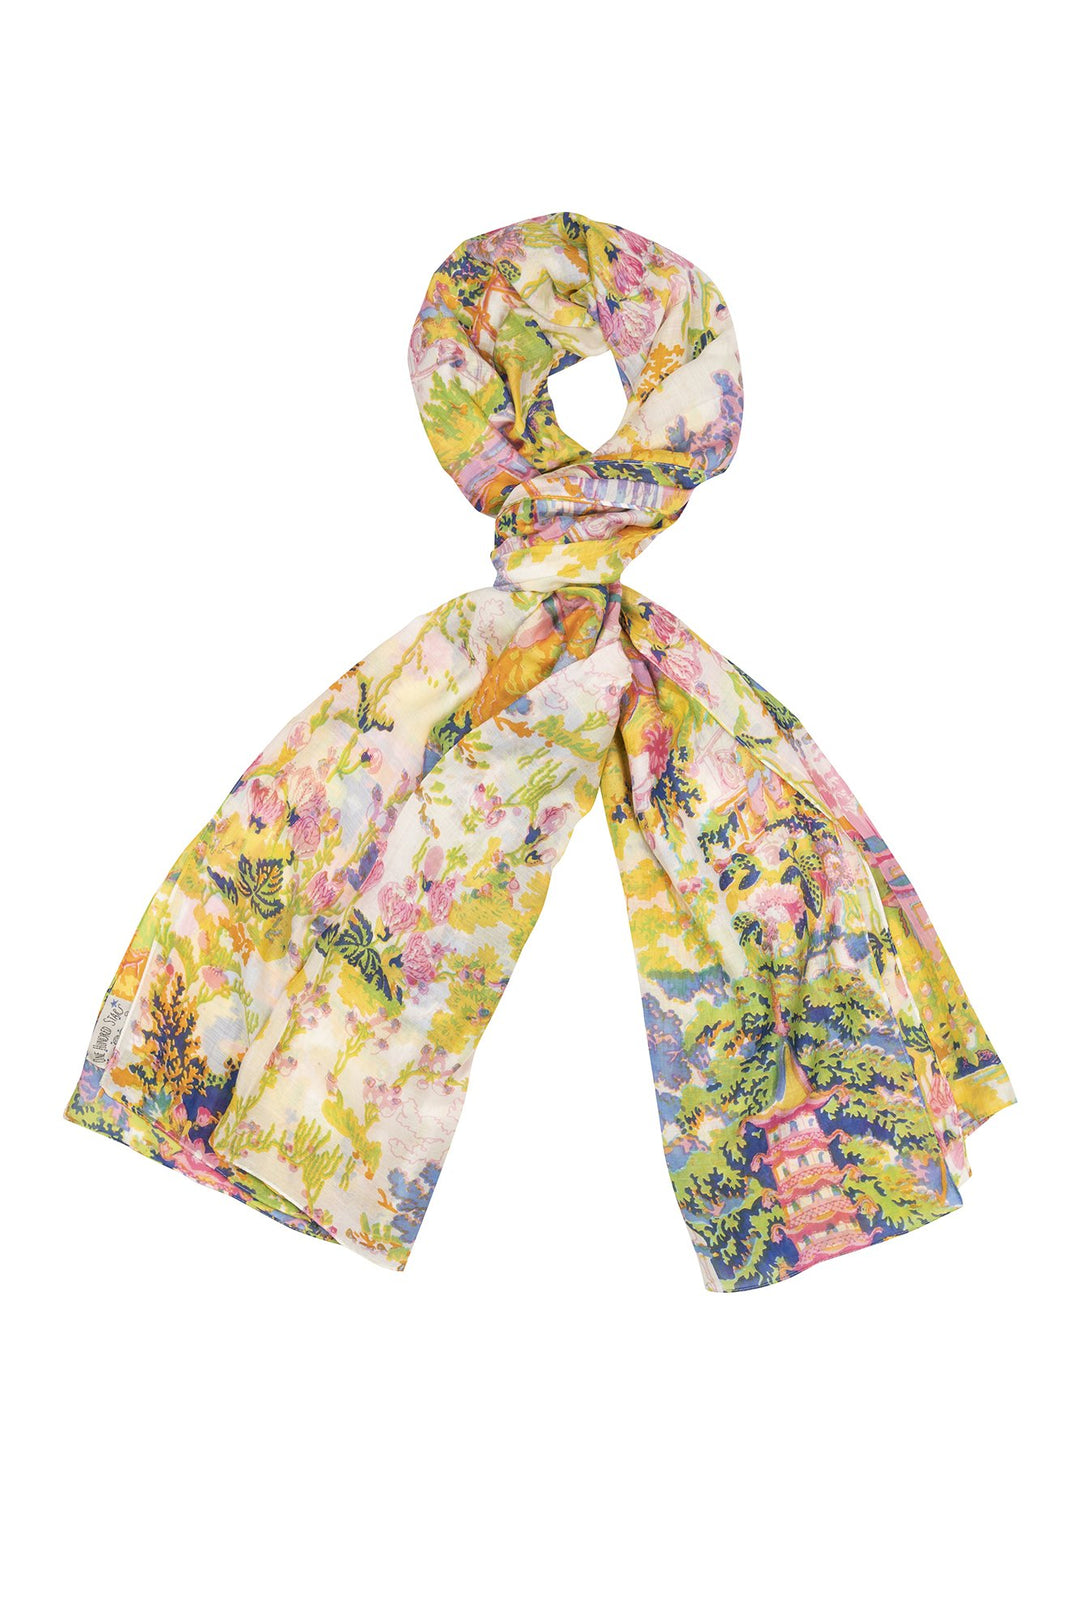 One Hundred Stars China Tree Summer Scarf- Our scarves are a full 100cm x 200cm making them perfect for layering in the winter months or worn as a delicate cover up during the summer seasons. 